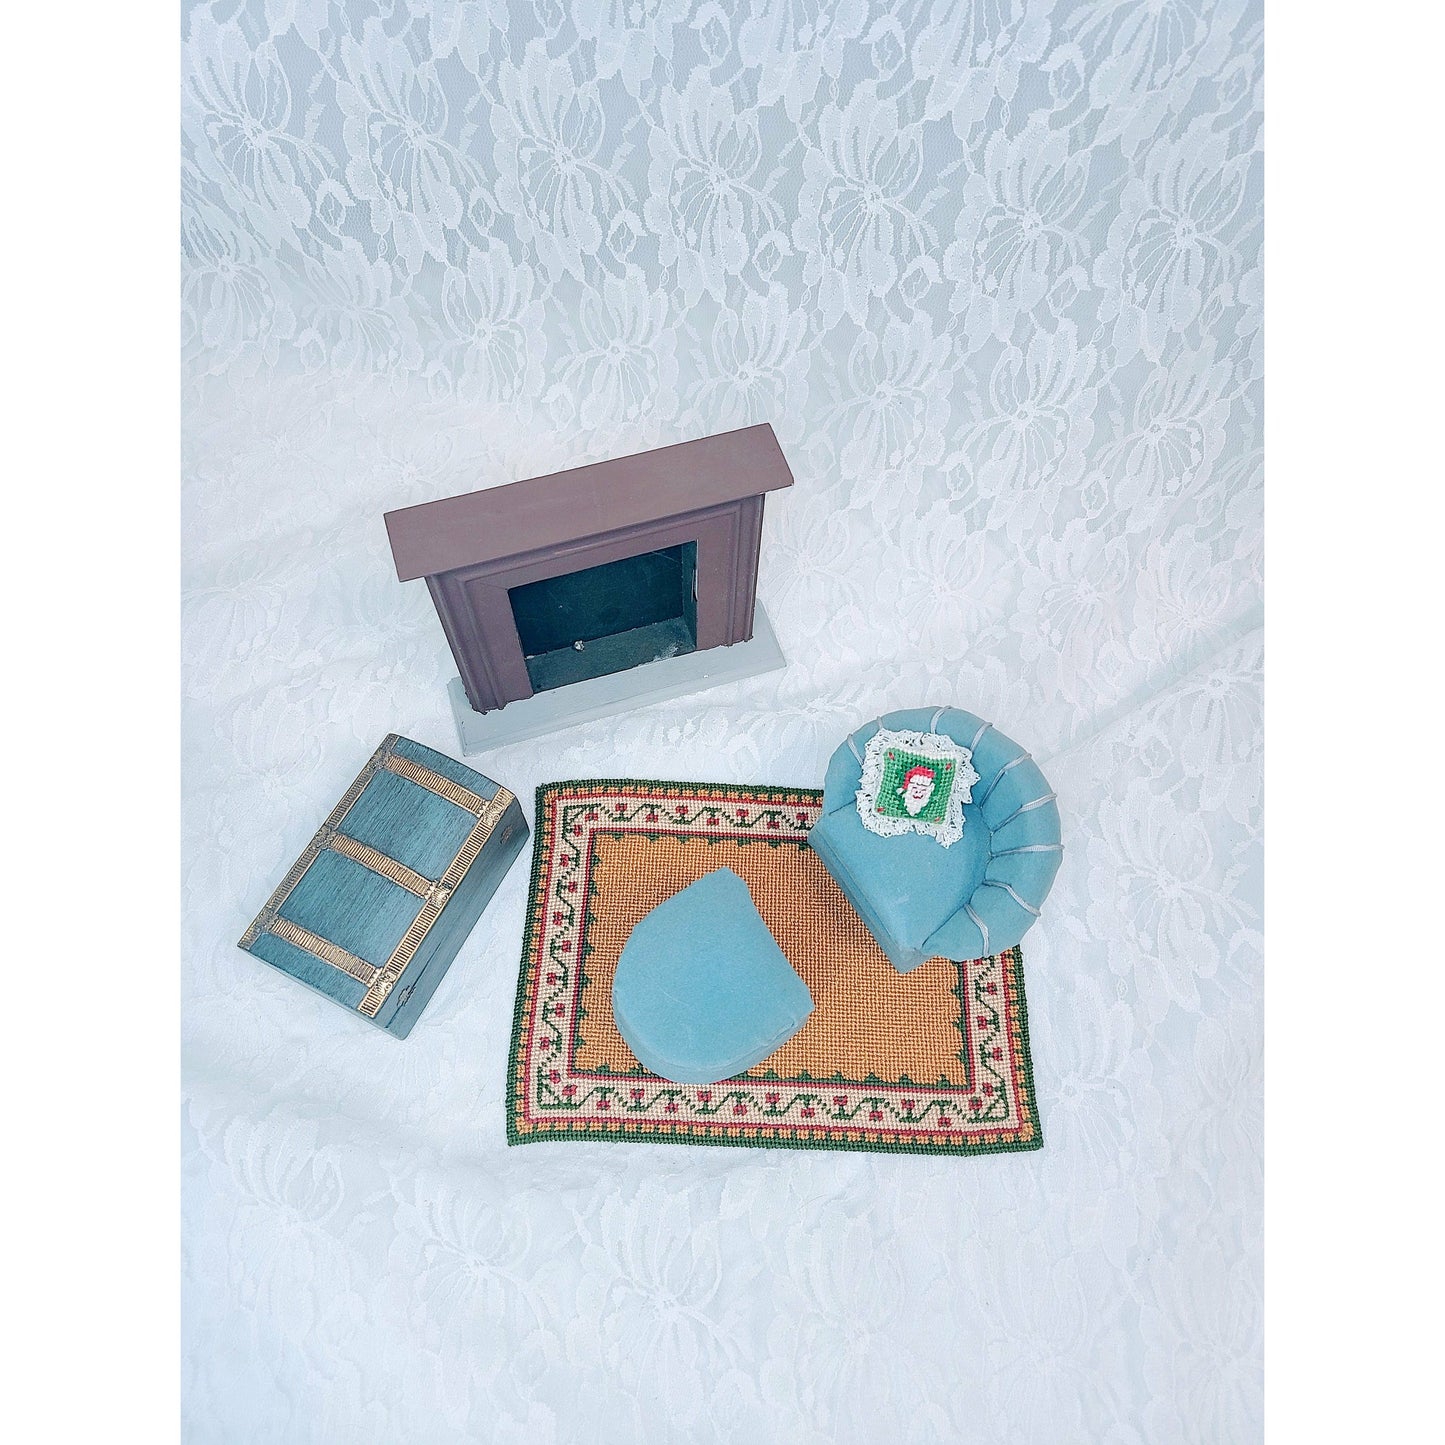 Miniature Wooden Living Room Six Piece Set for Dollhouse ~ 1:12 Scale ~ Vintage Dollhouse Furniture ~ Signed and HANDMADE 1970s